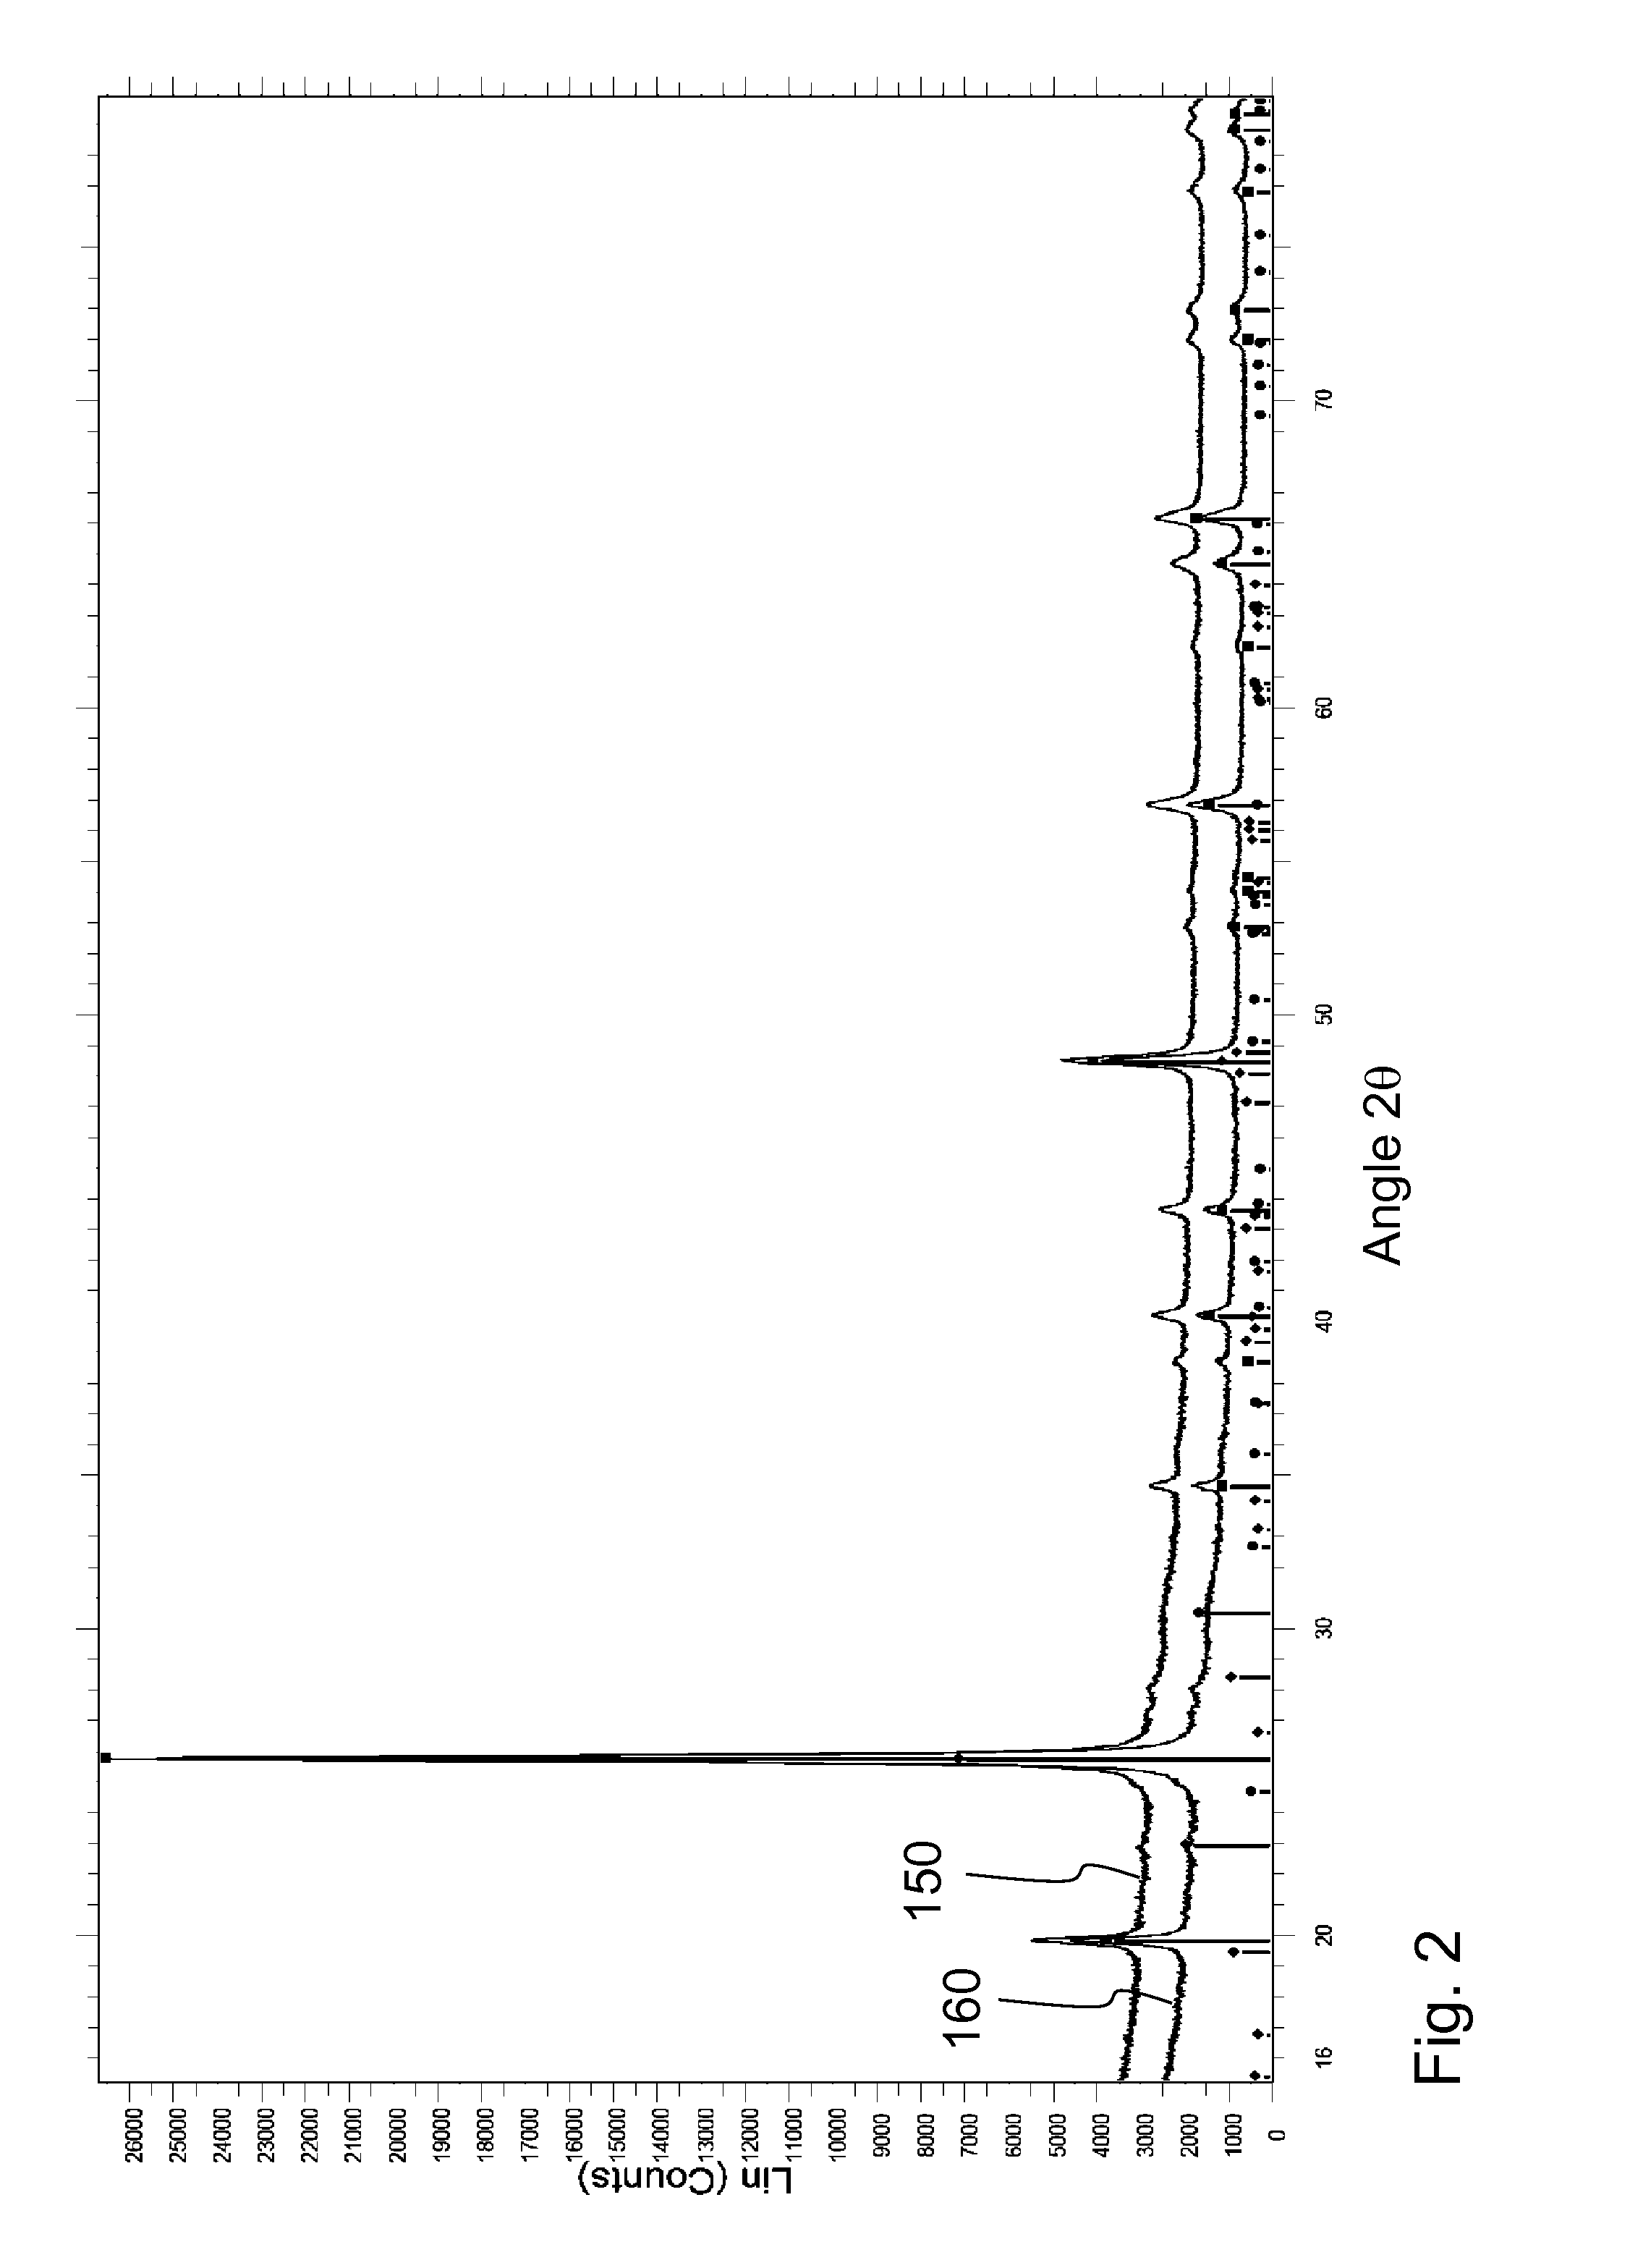 Glass ceramic cooking plate with locally increased transmission and method for producing such a glass ceramic cooking plate